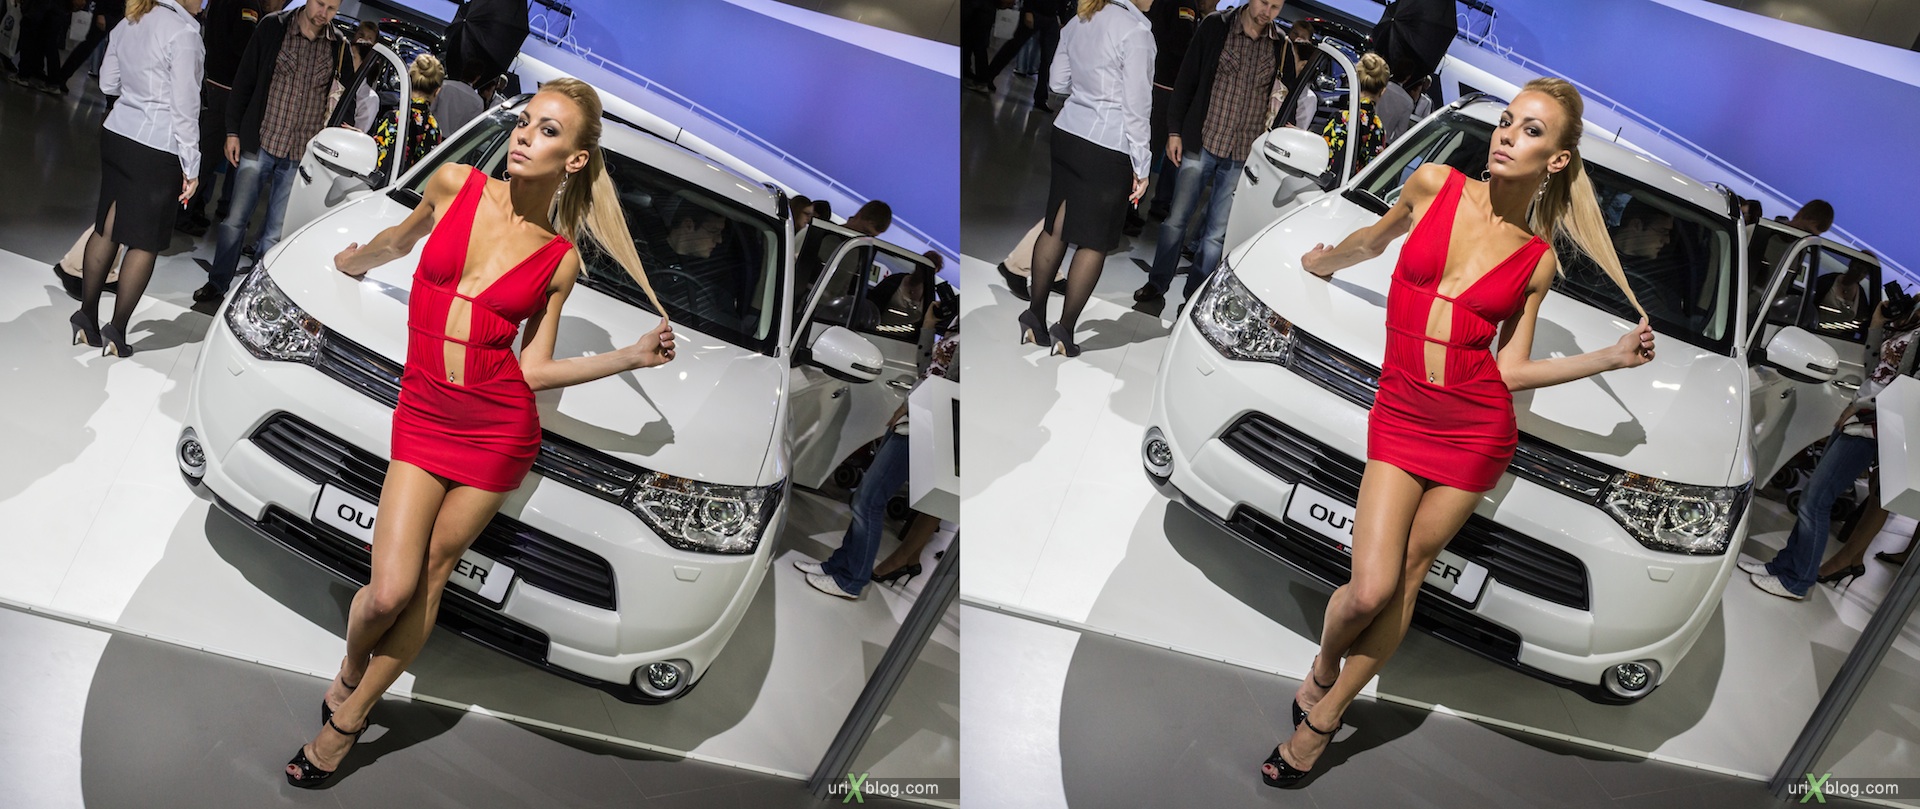 2012, Mitsubishi Outlander, girl, model, Moscow International Automobile Salon, auto show, 3D, stereo pair, cross-eyed, crossview